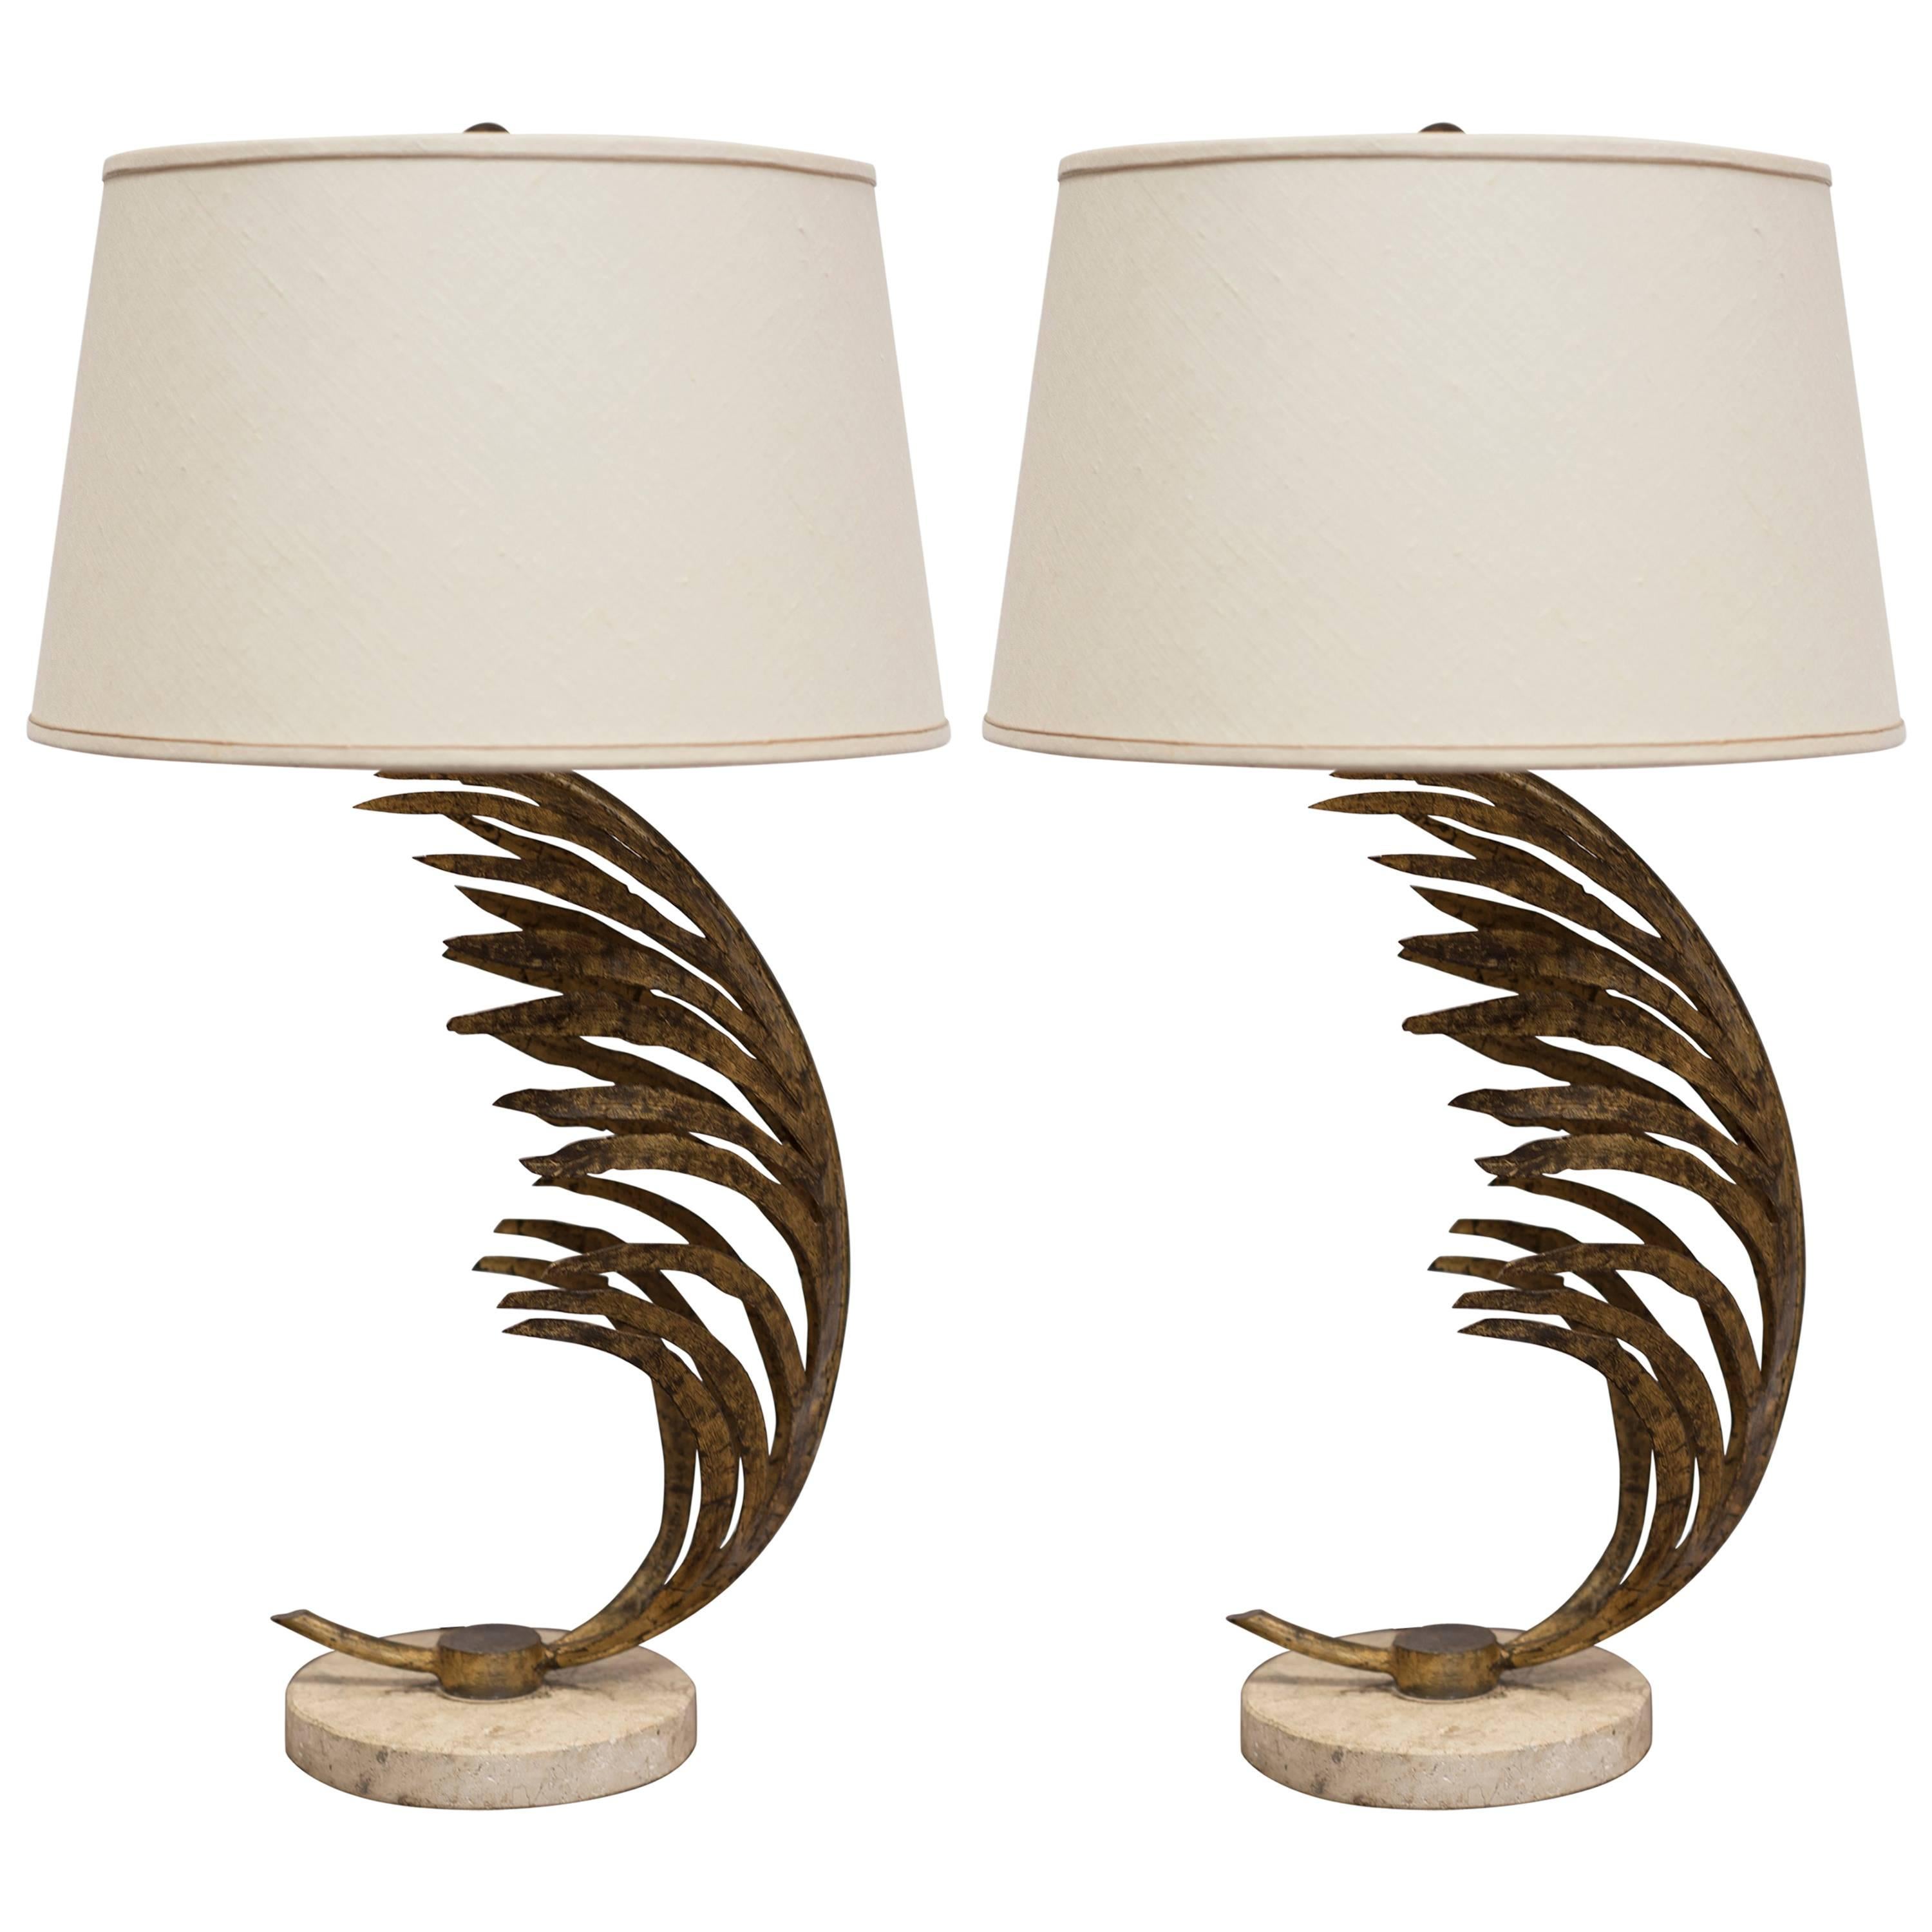 AMERICAN DESIGN - Gilt & Brass Palm Frond Table Lamps